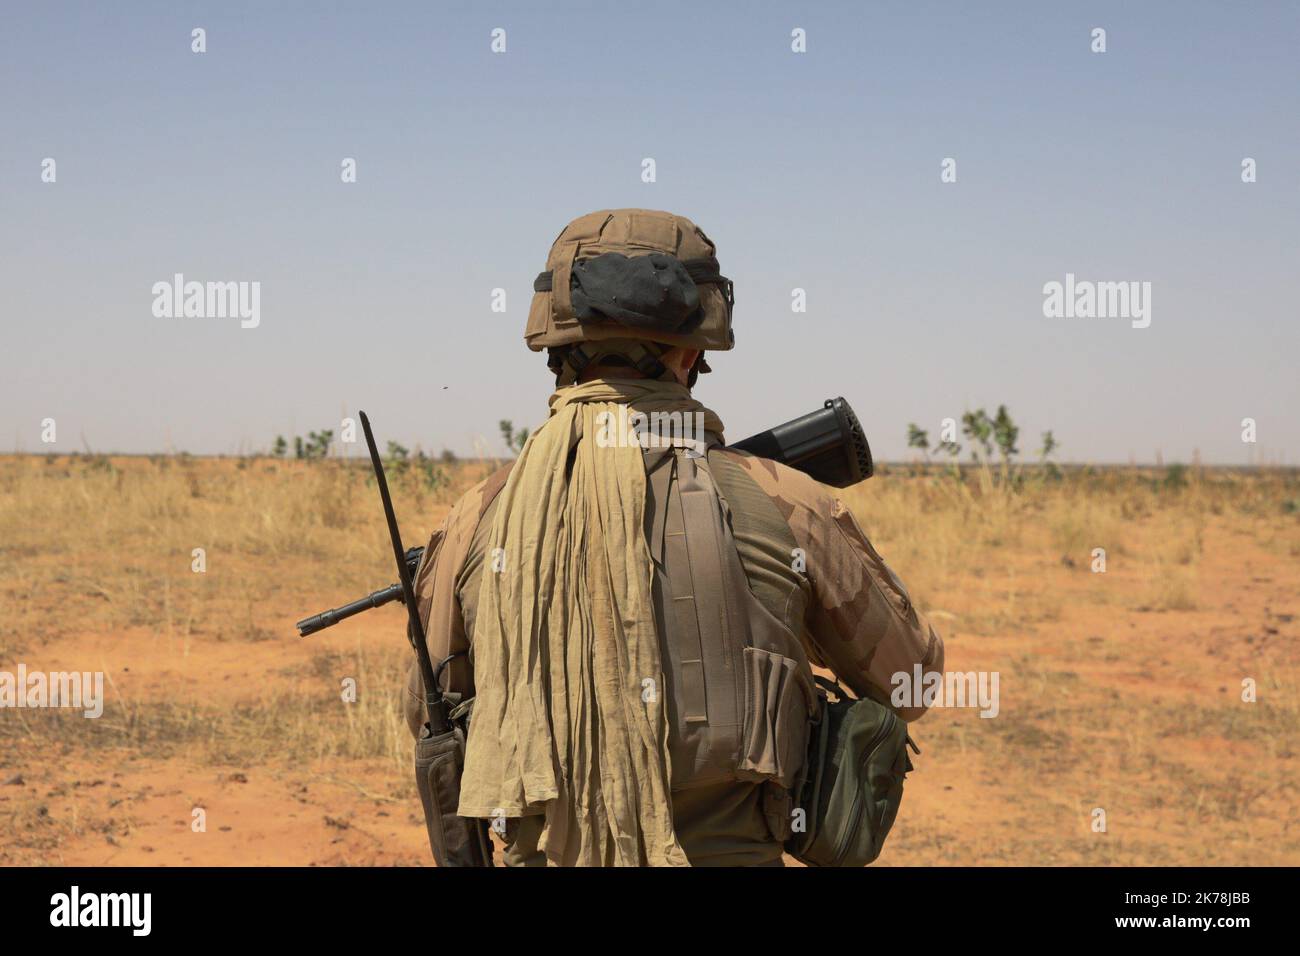 French soldiers of Operation Barkhane.  Operation Barkhane is an ongoing anti-insurgent operation in Africa's Sahel region, which commenced 1 August 2014. It consists of a 3,000-strong French force, which will be permanent and headquartered in -N'Djamena, the capital of -Chad. The operation has been designed with five countries, and former French colonies, that span the Sahel: -Burkina-Faso, -Chad, -Mali, -Mauritania and -Niger. These countries are collectively referred to as the 'G5 Sahel'. Stock Photo